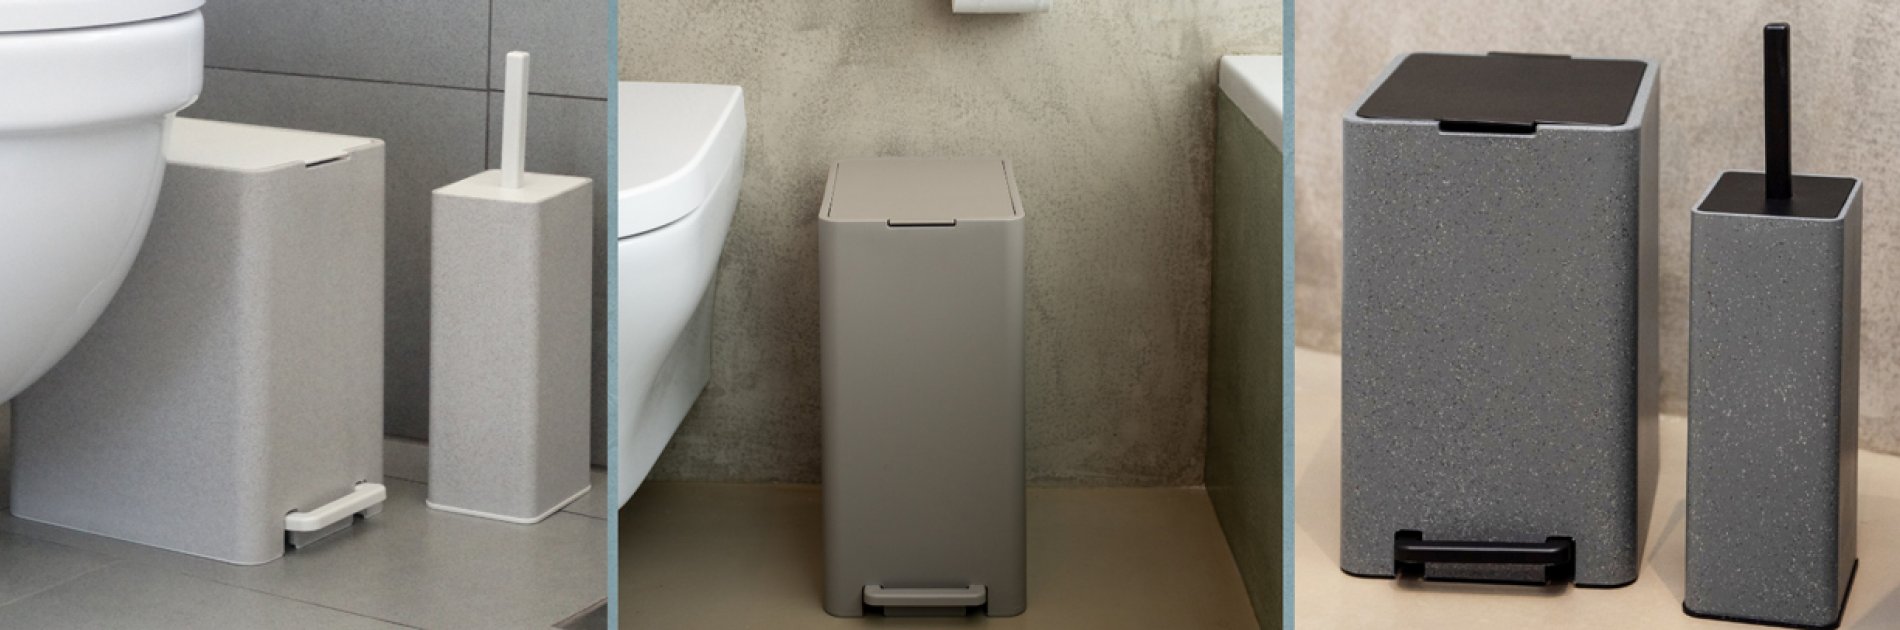 Soft close bathroom bins in different colors and capacity